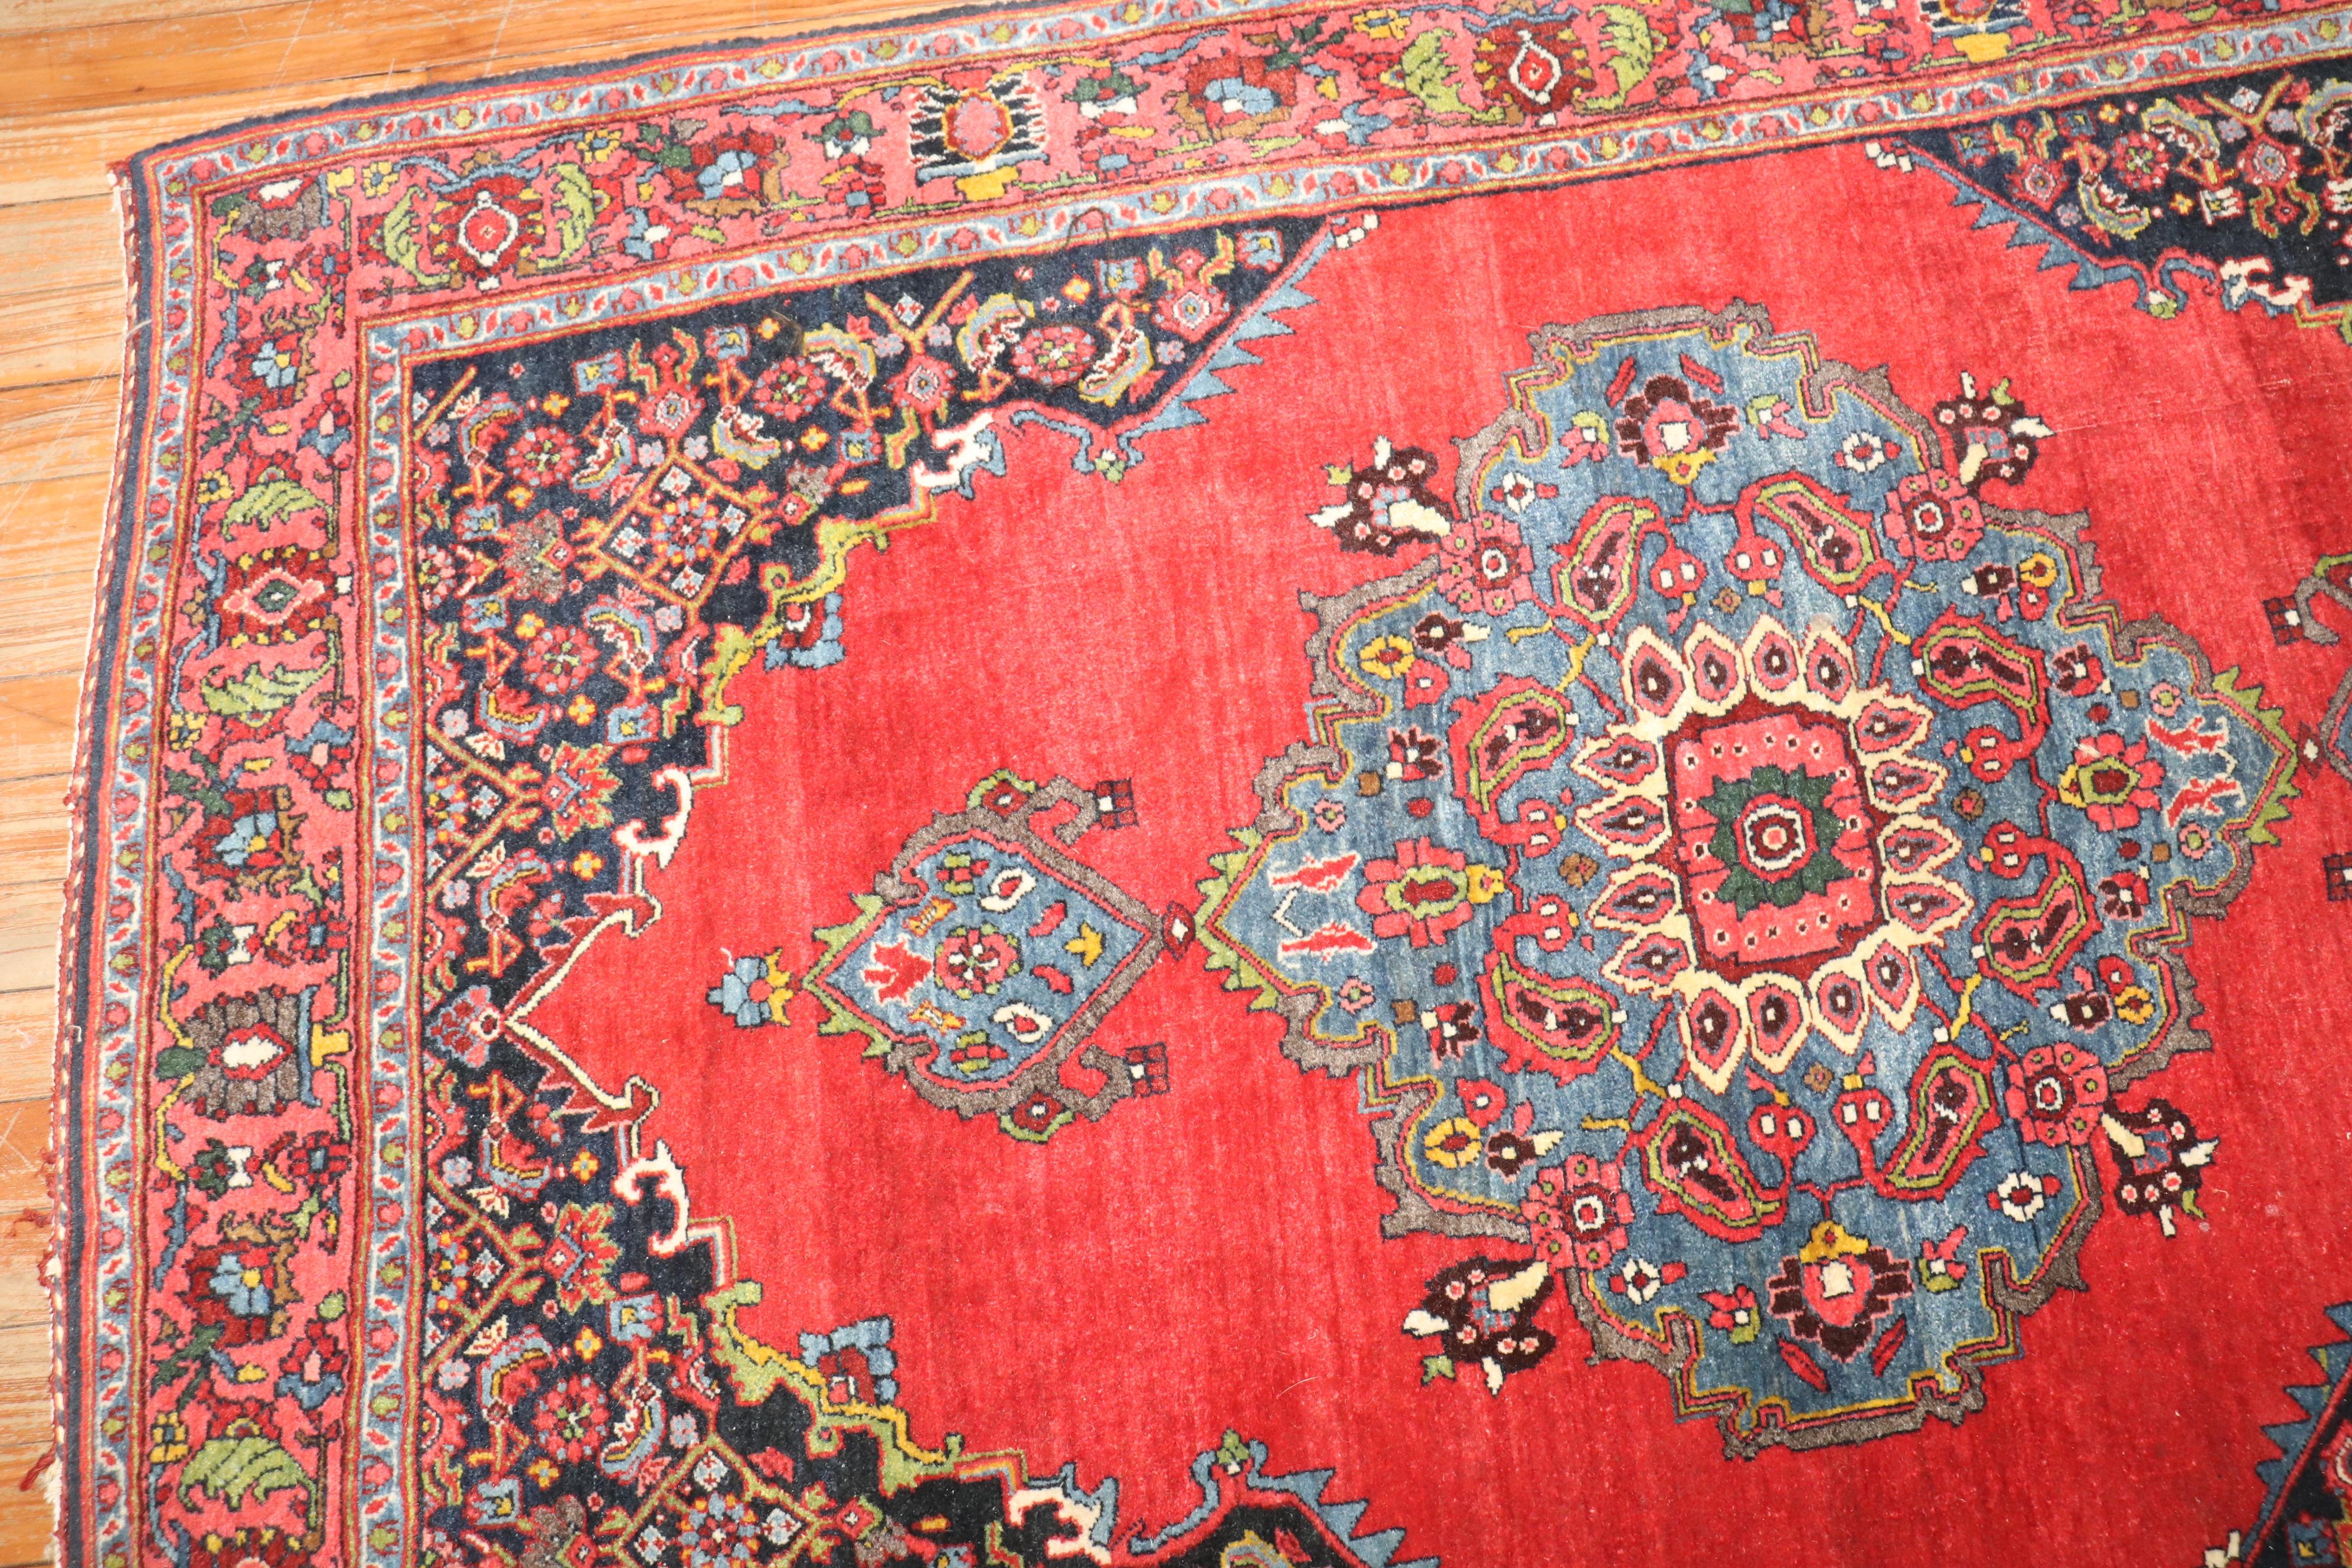 Zabihi Collection Authentic Antique Persian Bidjar Rug In Good Condition For Sale In New York, NY